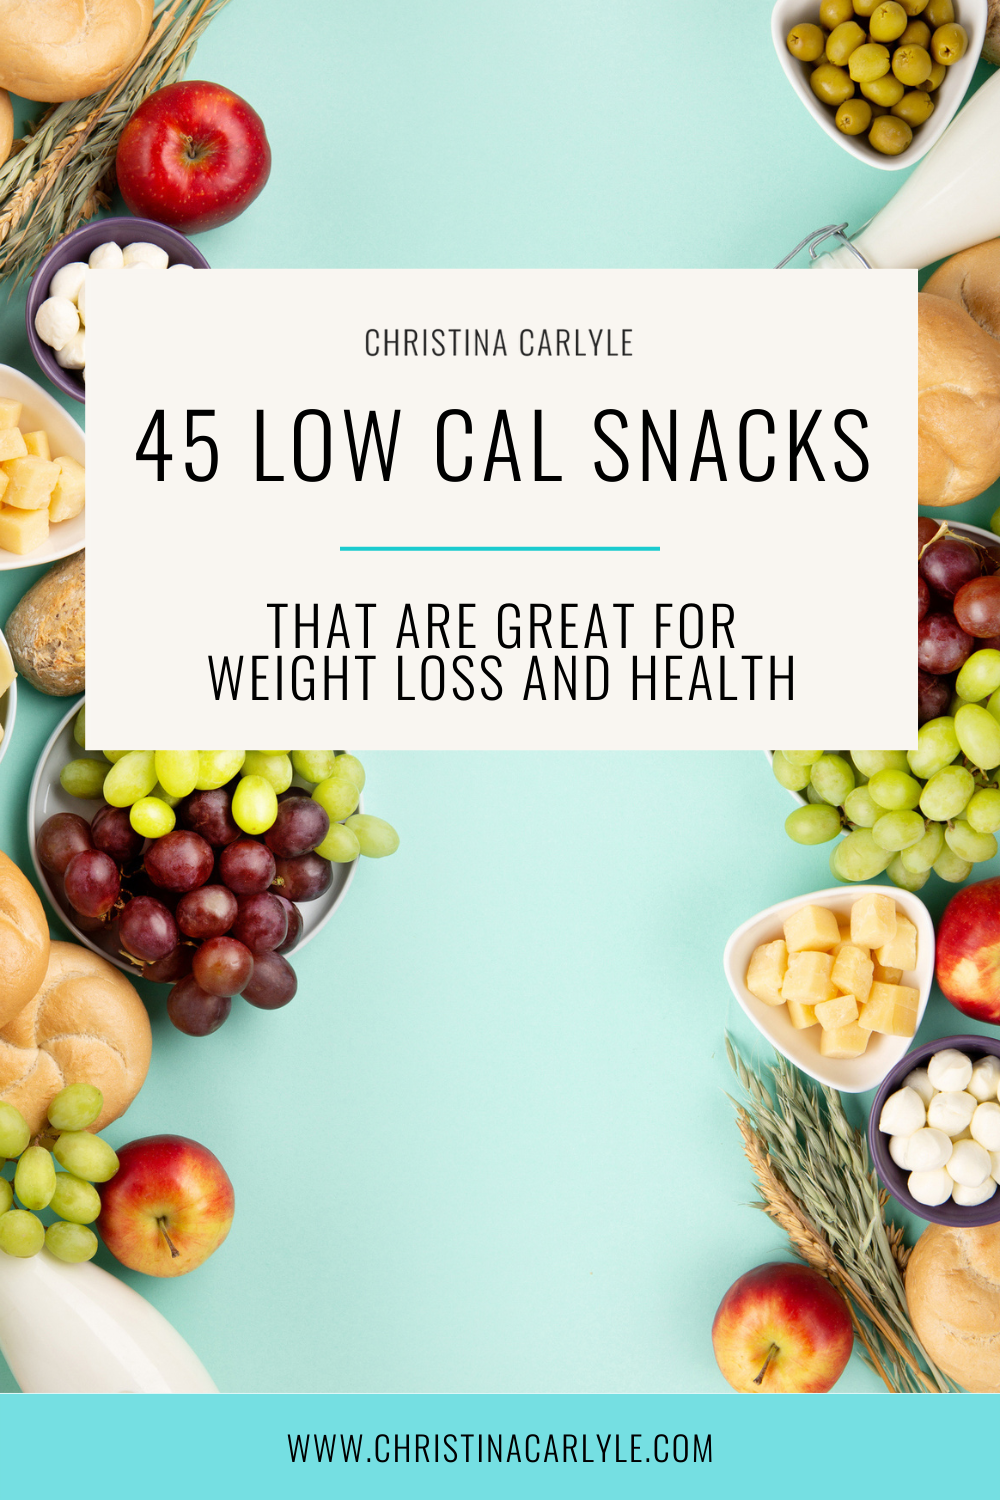 text that says 45 low cal snacks that are great for weight loss and health over a flatlay of fruit, vegetables, nuts, seeds, and other healthy snacks